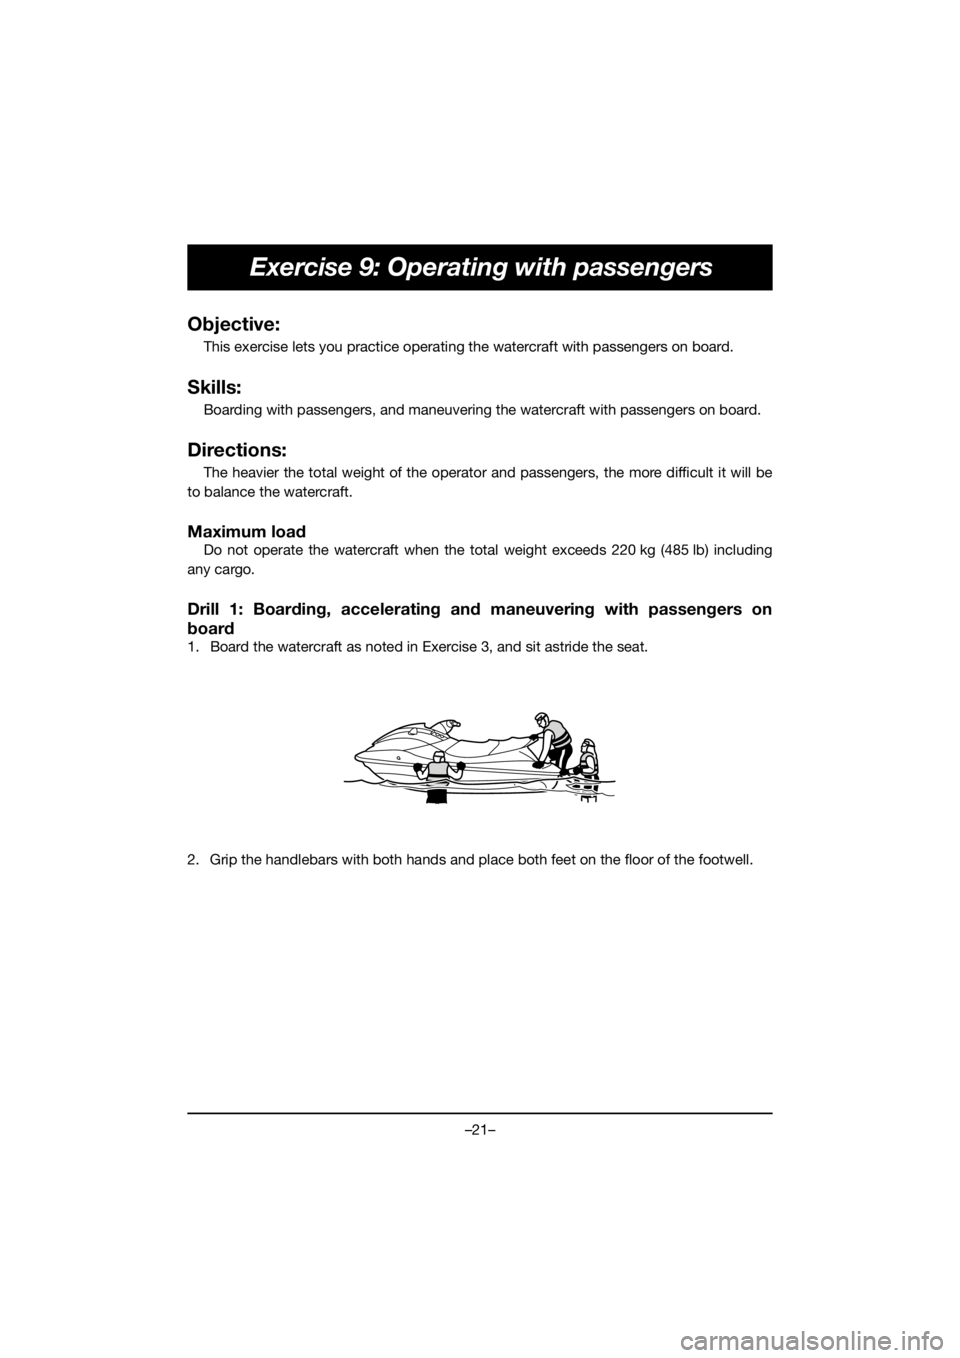 YAMAHA EXR 2020 Owners Manual –21–
Exercise 9: Operating with passengers
Objective:
This exercise lets you practice operating the watercraft with passengers on board.
Skills:
Boarding with passengers, and maneuvering the water